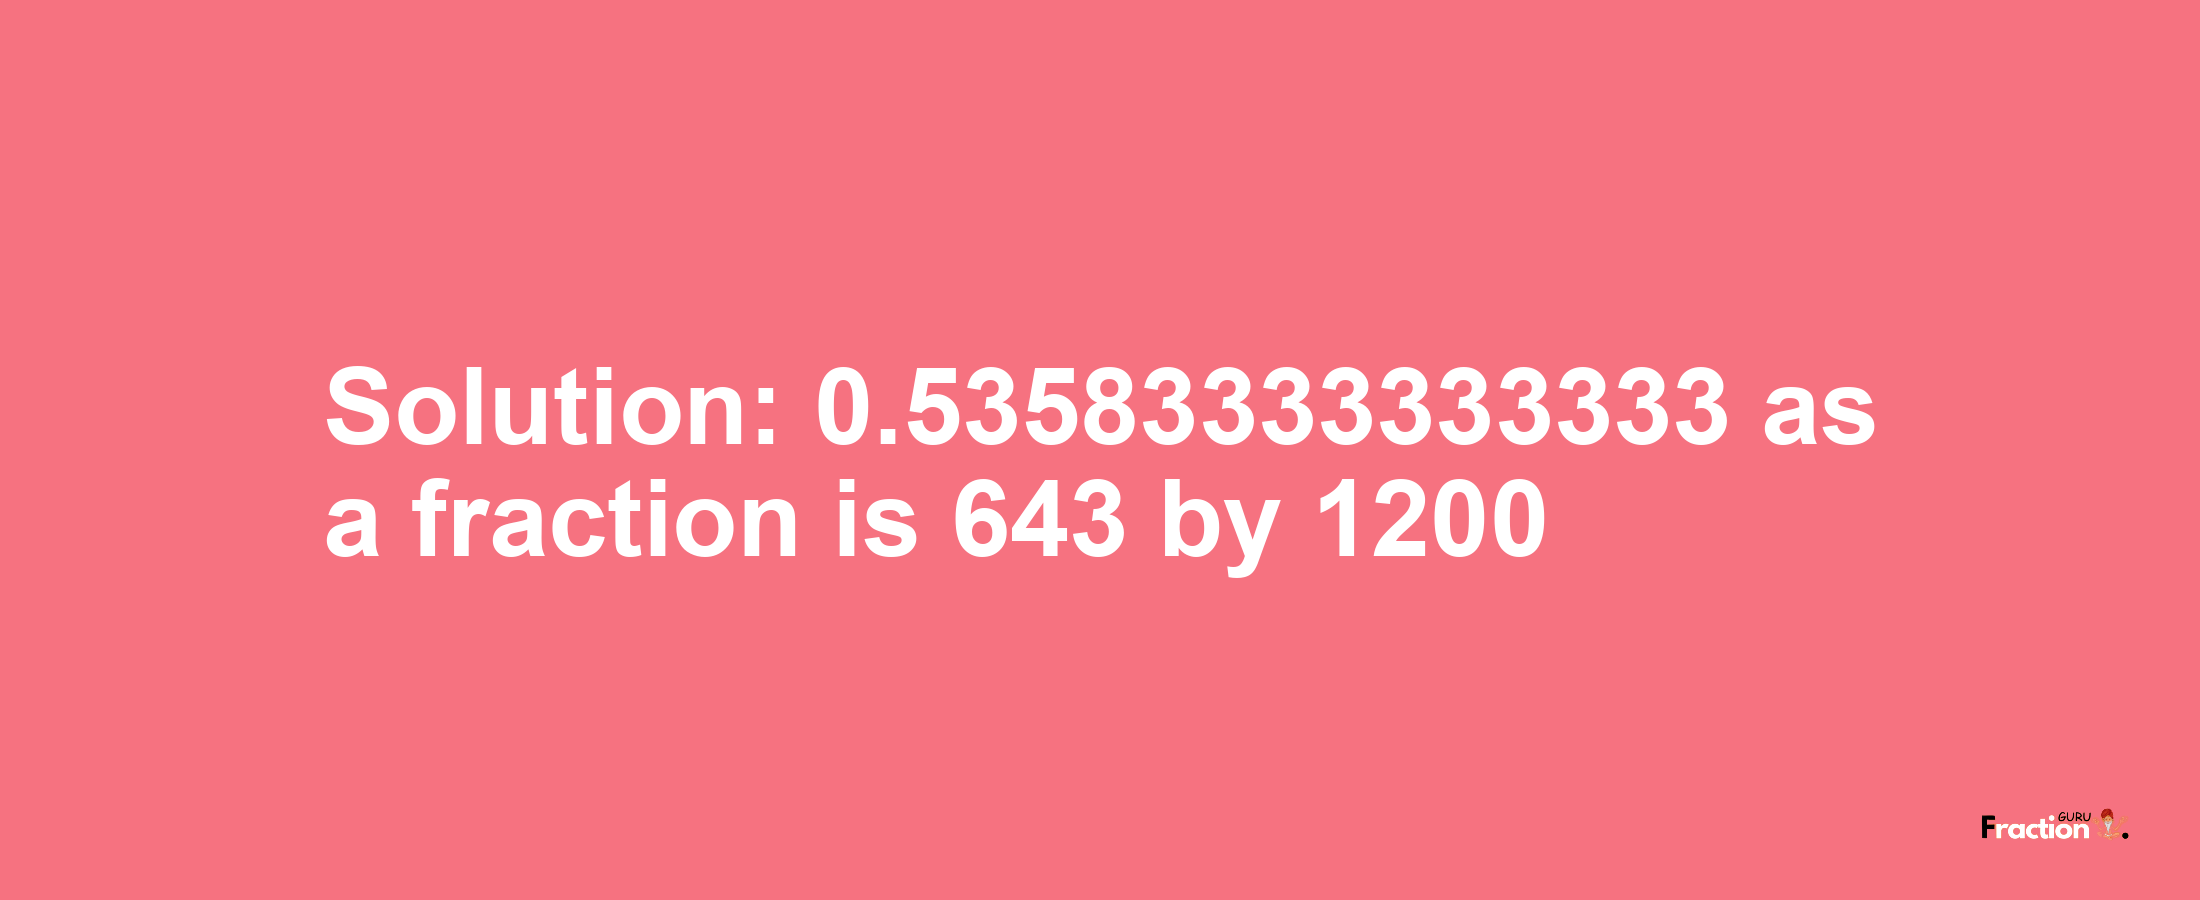 Solution:0.53583333333333 as a fraction is 643/1200